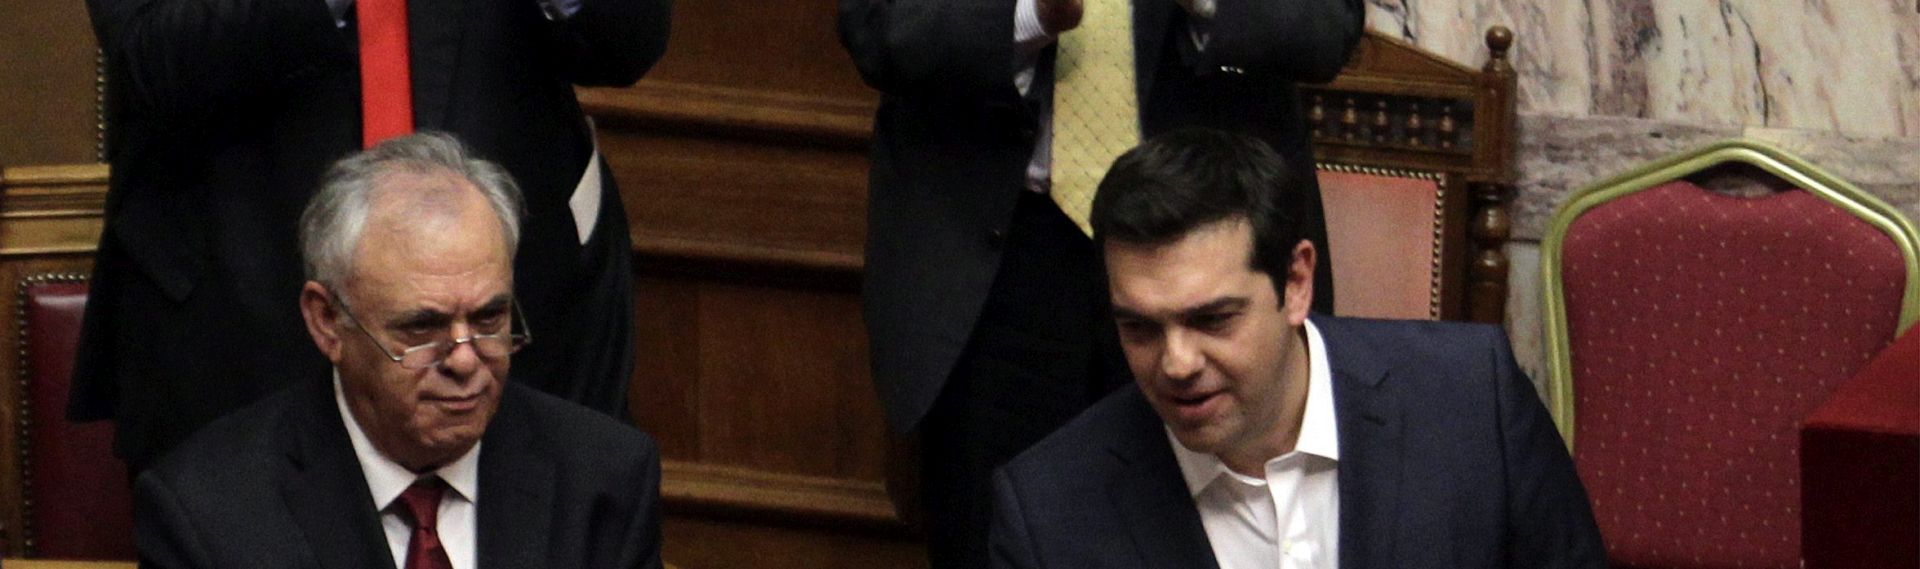 epa04968018 Members of the government applaud Greek Prime Minister Alexis Tsipras (R) after the end of his speech before confidence vote at the parliament in Athens, Greece, 07 October 2015. The debate on the government policy statements in Parliament plenum will be completed on Wednesday midnight. Afterwards the parliament will be asked to give a vote of confidence to the government.  EPA/ALEXANDROS VLACHOS